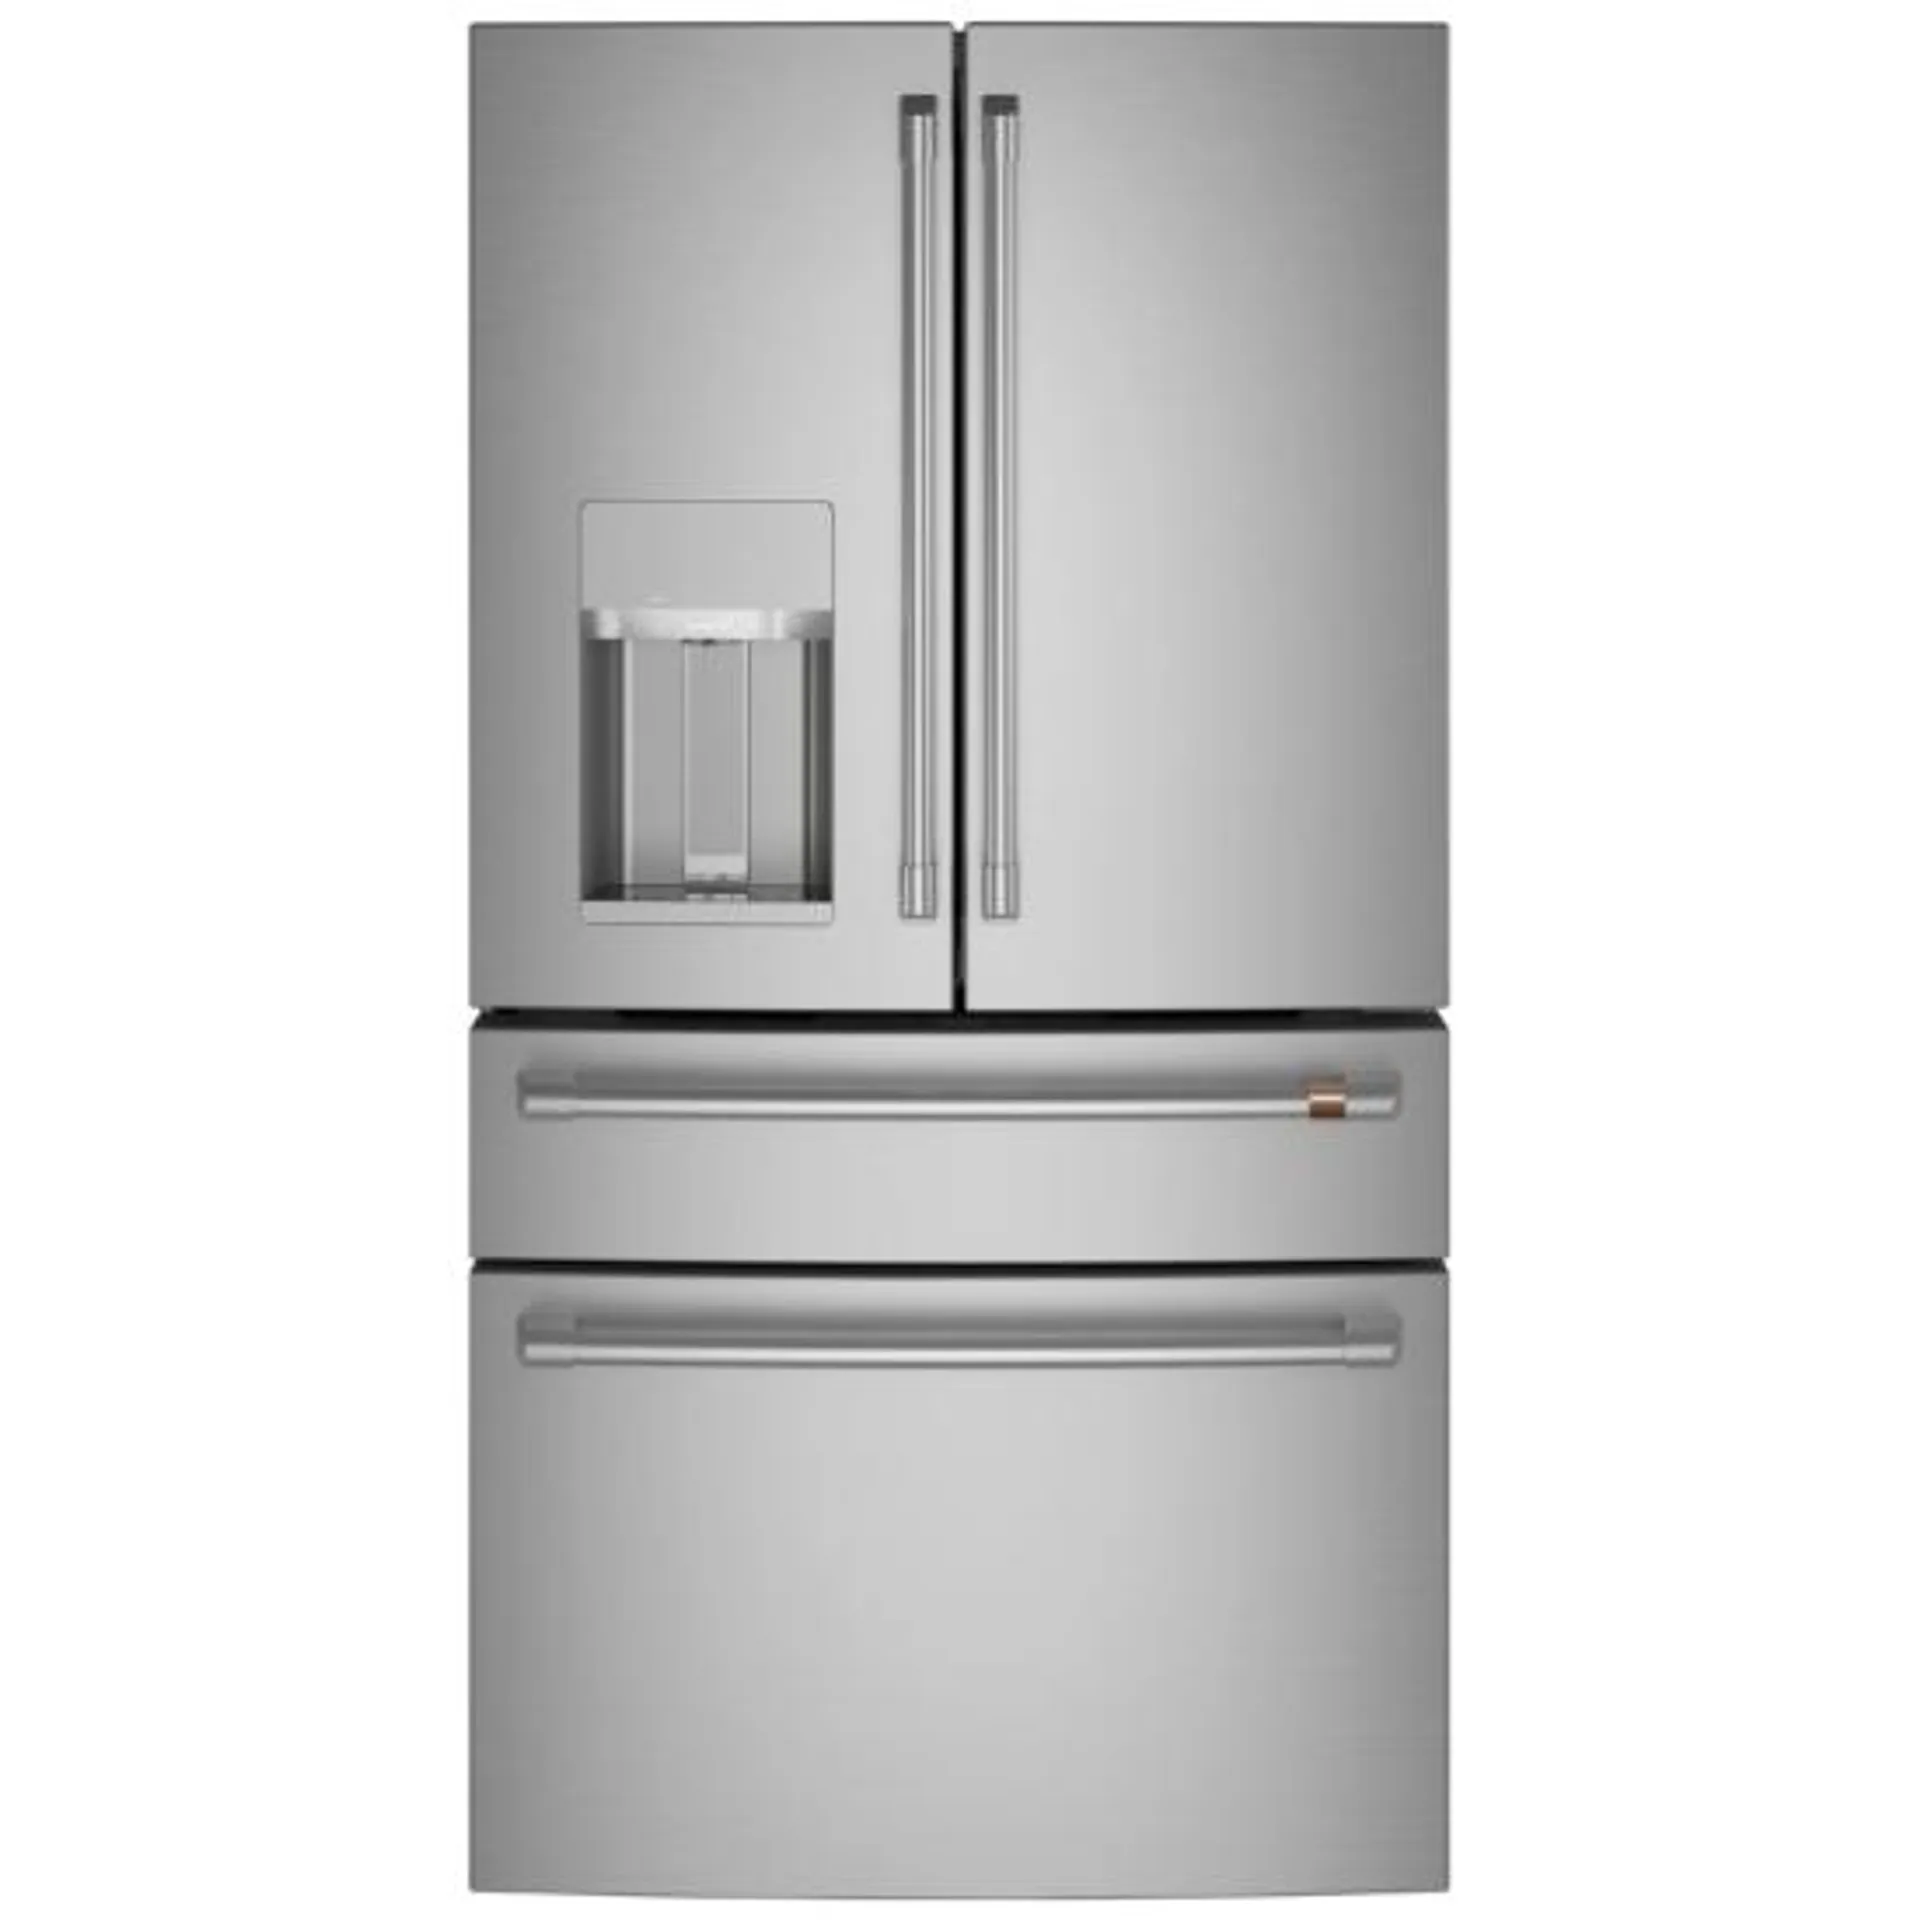 Cafe CVE28DP2NS1 French Door Refrigerator, 36 inch Width, ENERGY STAR Certified, 27.8 cu. ft. Capacity, Stainless Steel colour AutoFill